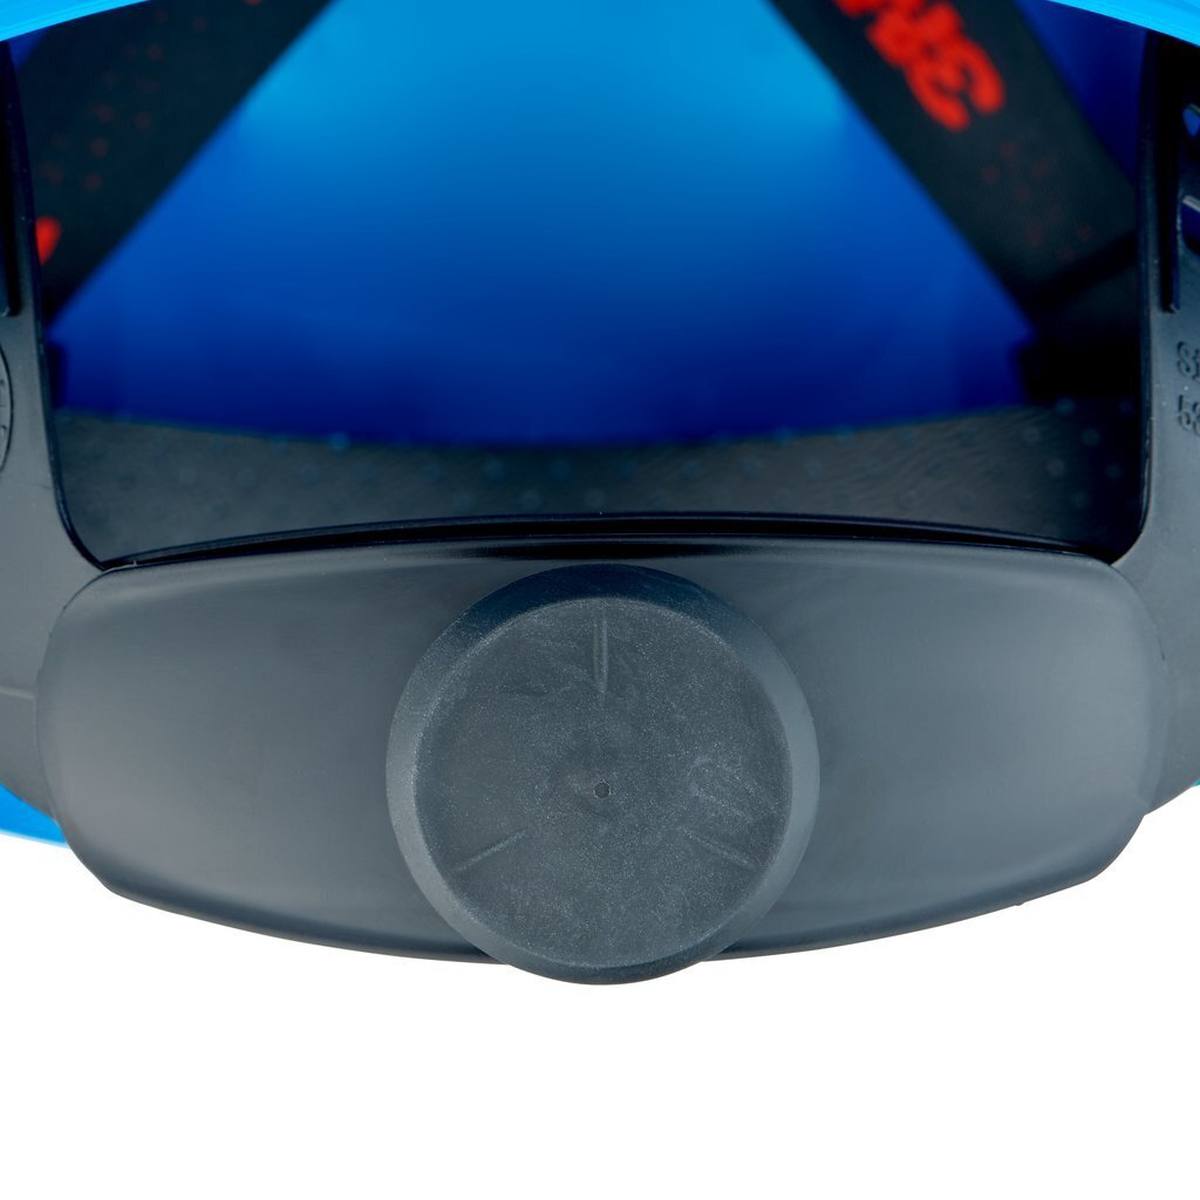 3M G3000 safety helmet with UV indicator, blue, ABS, ventilated ratchet fastener, plastic sweatband, reflective sticker